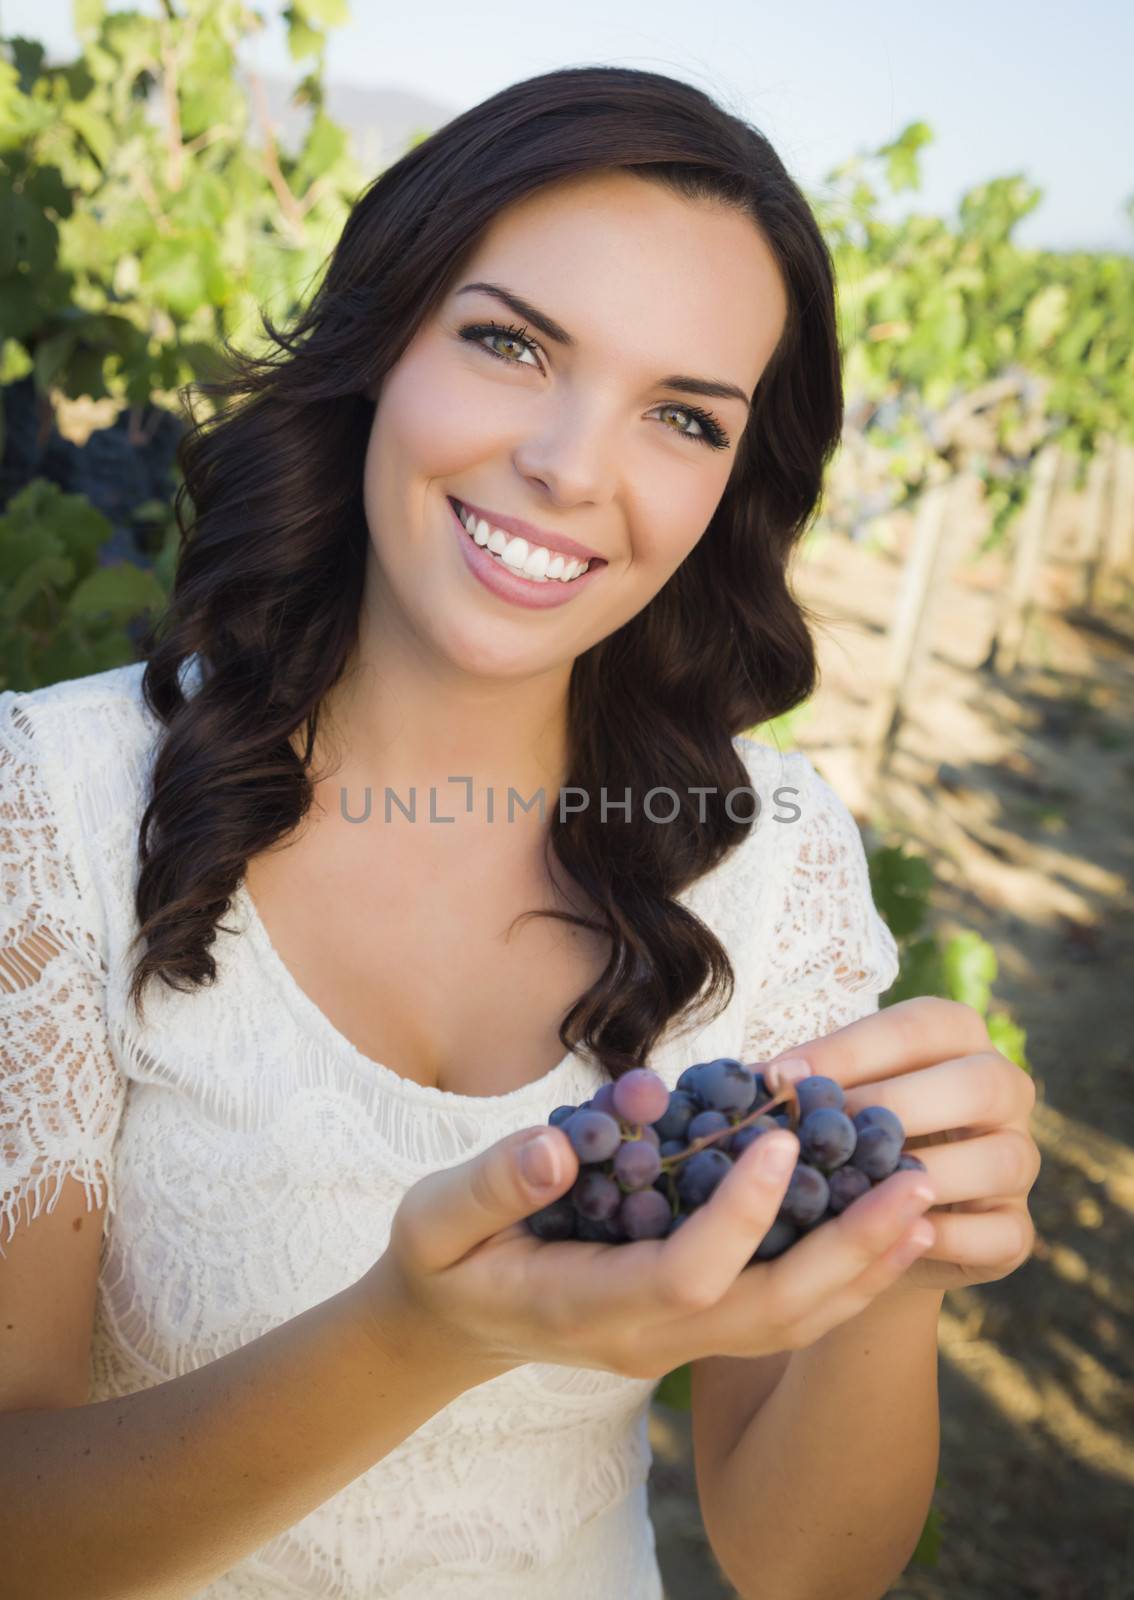 Young Adult Mixed Race Woman Enjoying The Wine Grapes in The Vineyard Outside.